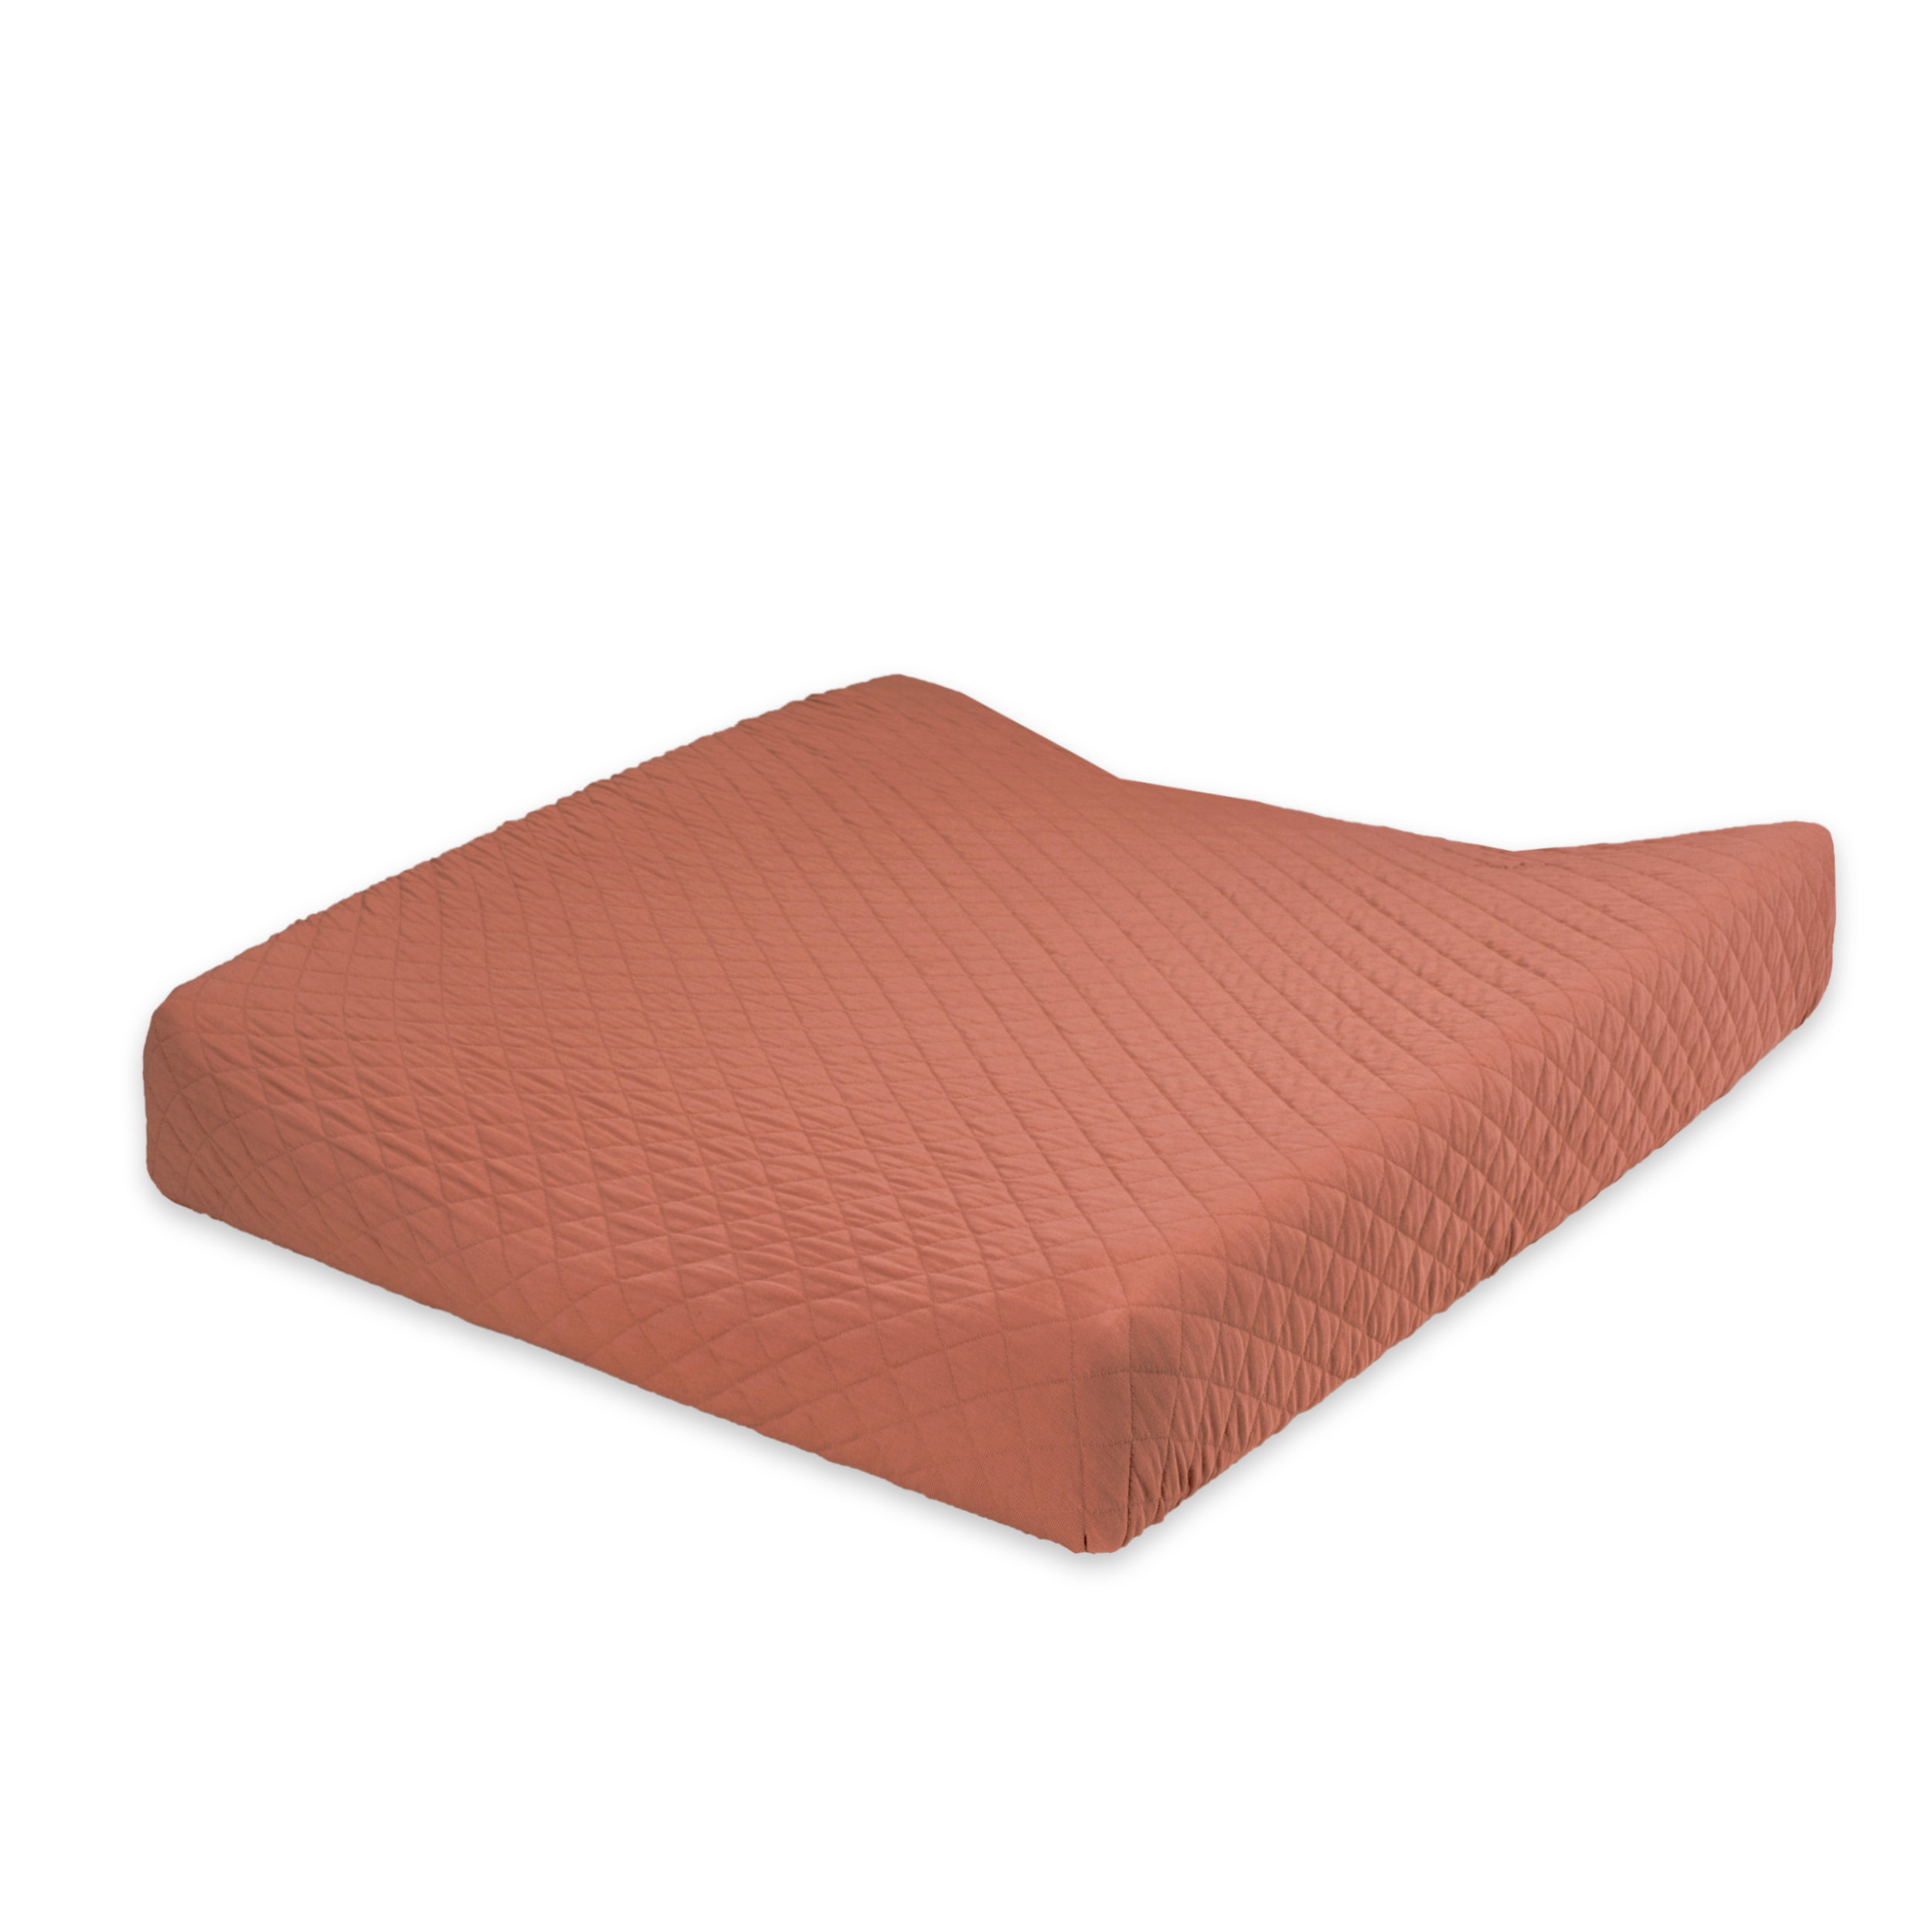 Changing mat cover Pady quilted jersey 50x75cm QUILT Brick